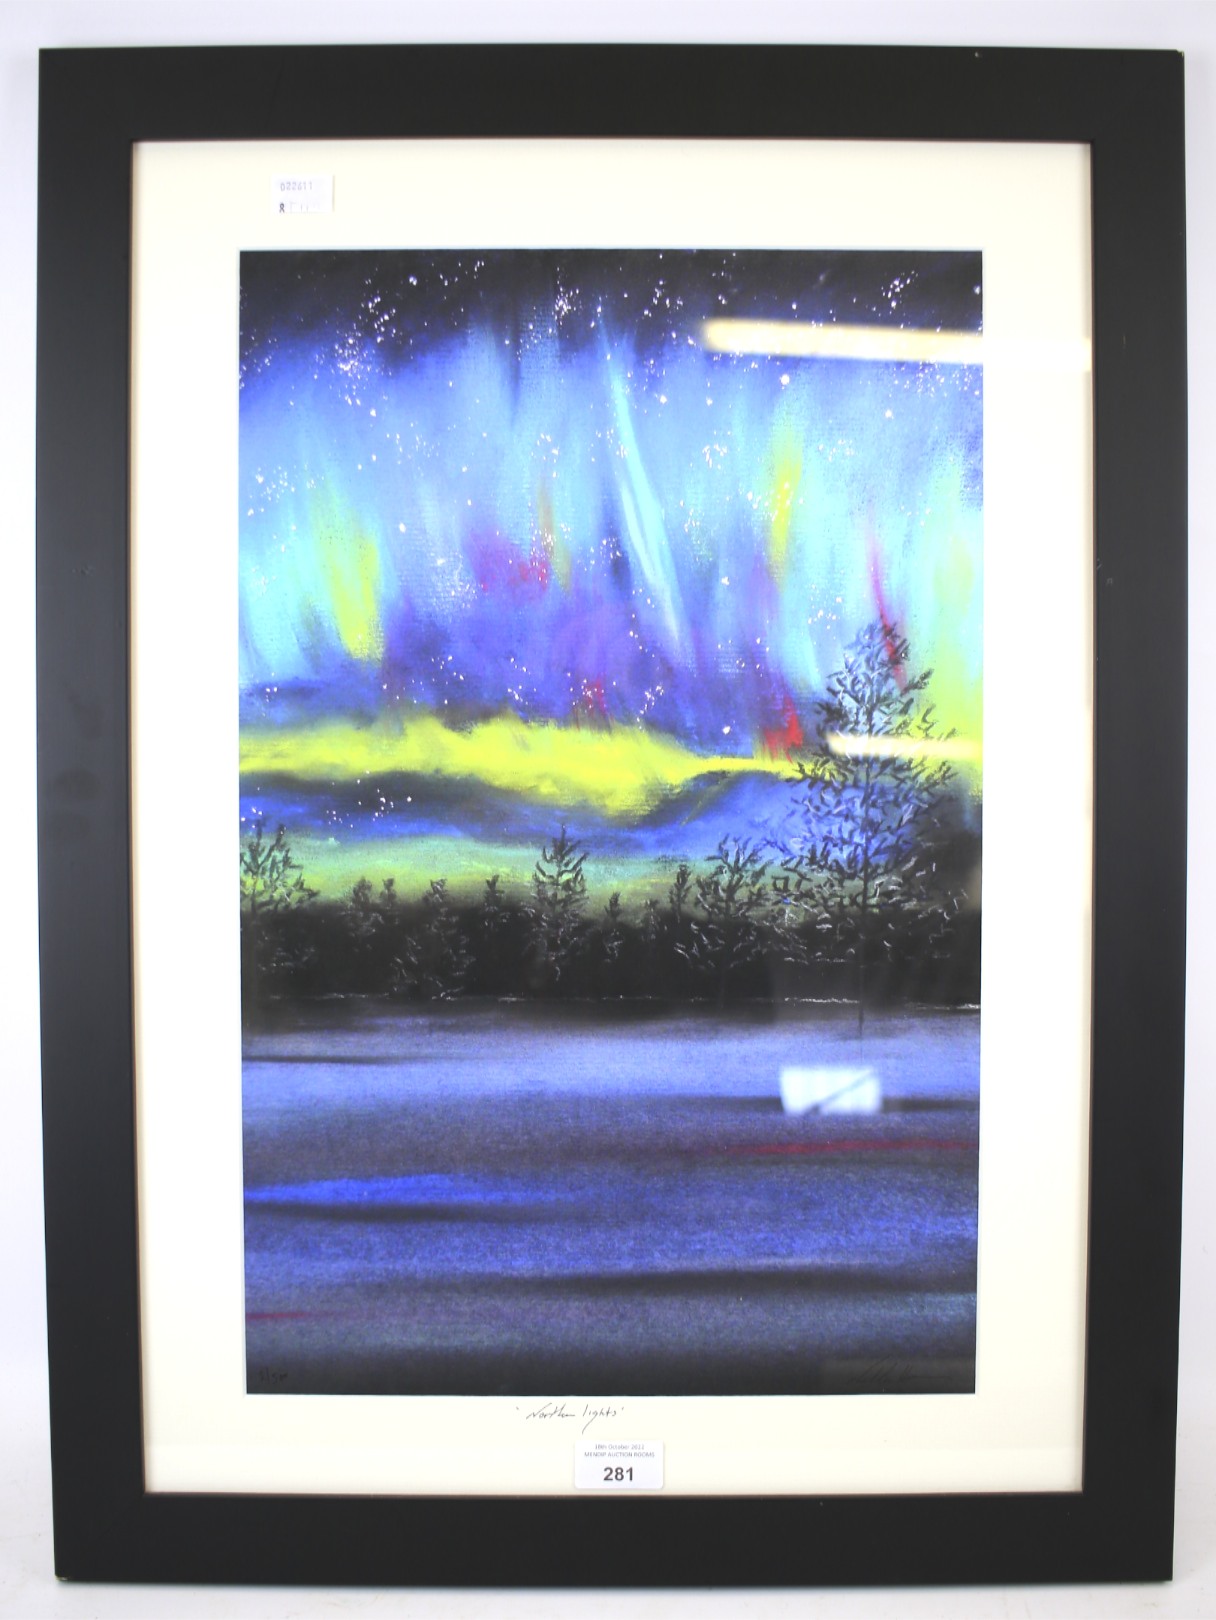 A Nellie Hearn limited edition print titled 'Northern Lights'.